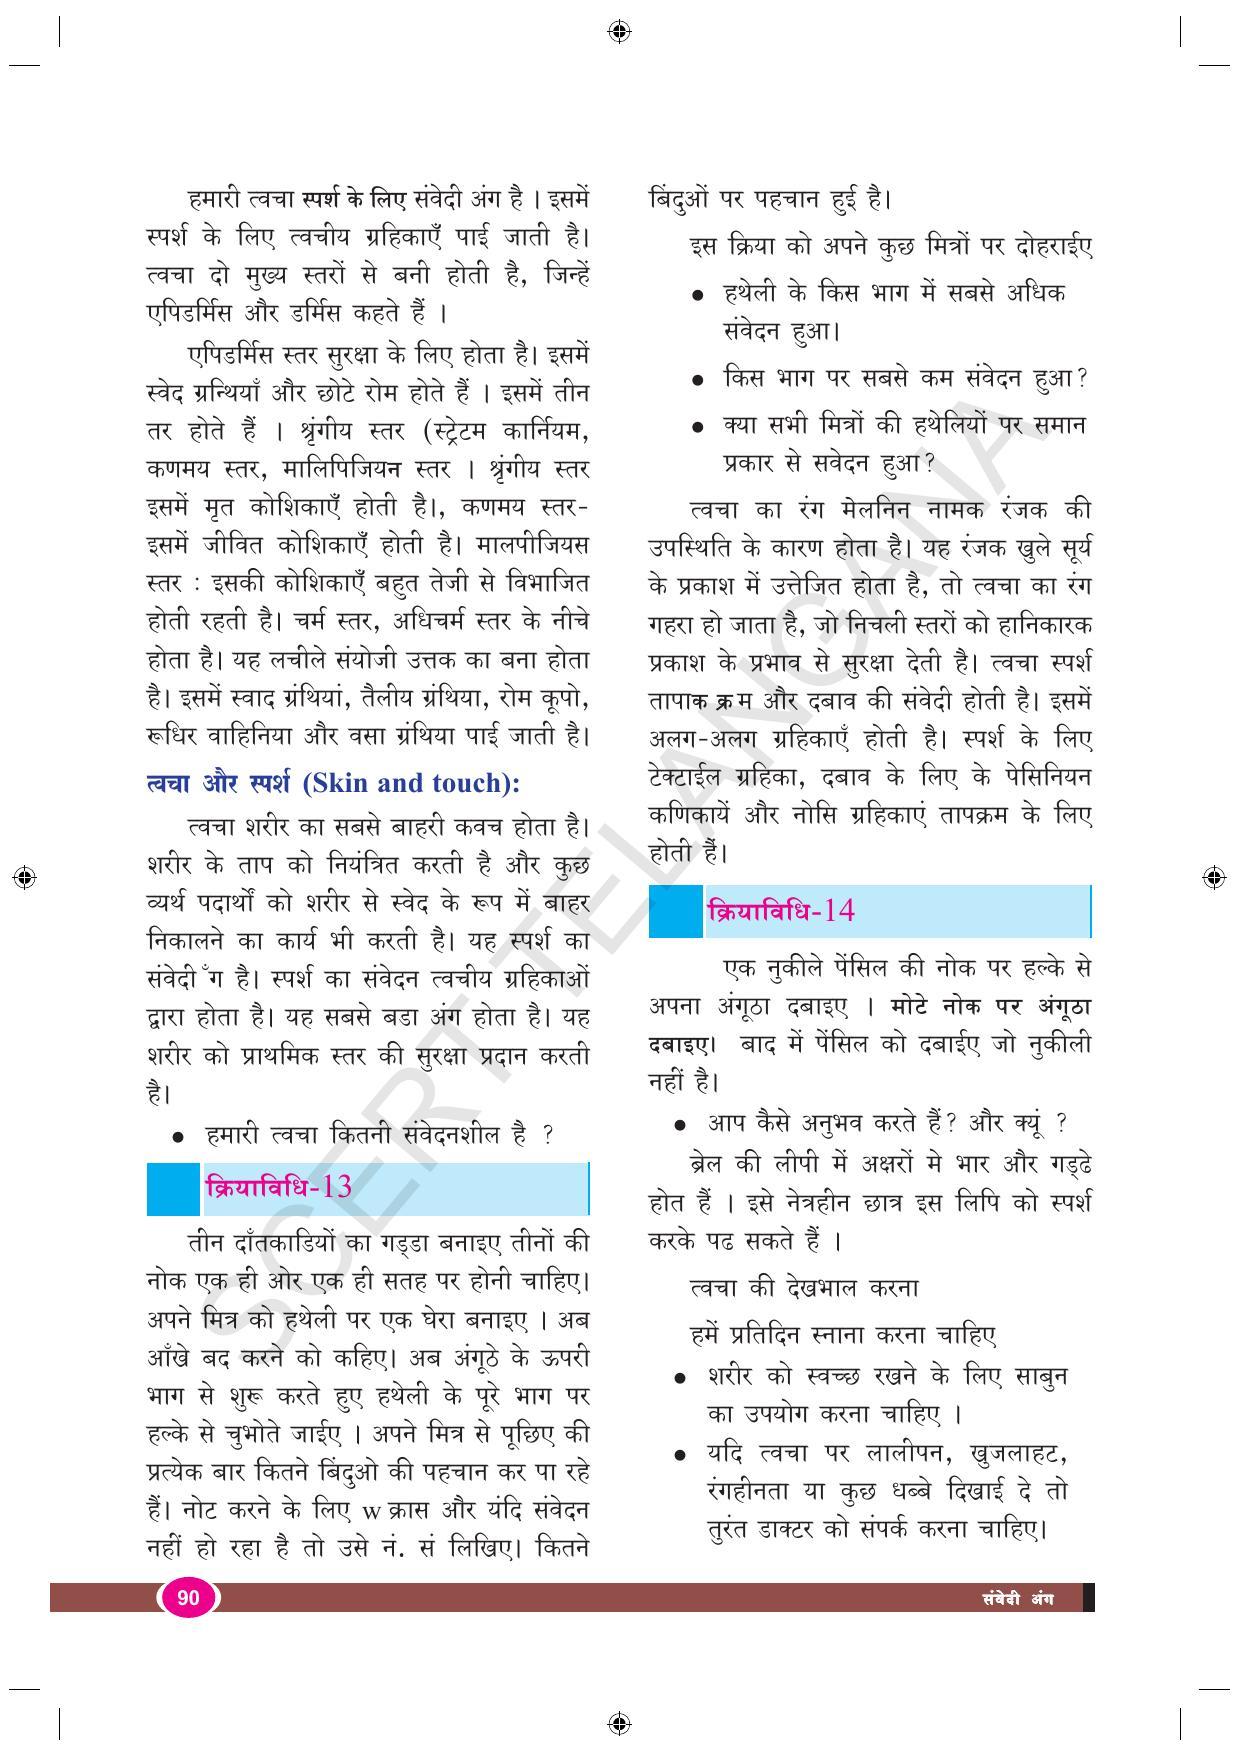 TS SCERT Class 9 Biological Science (Hindi Medium) Text Book - Page 102